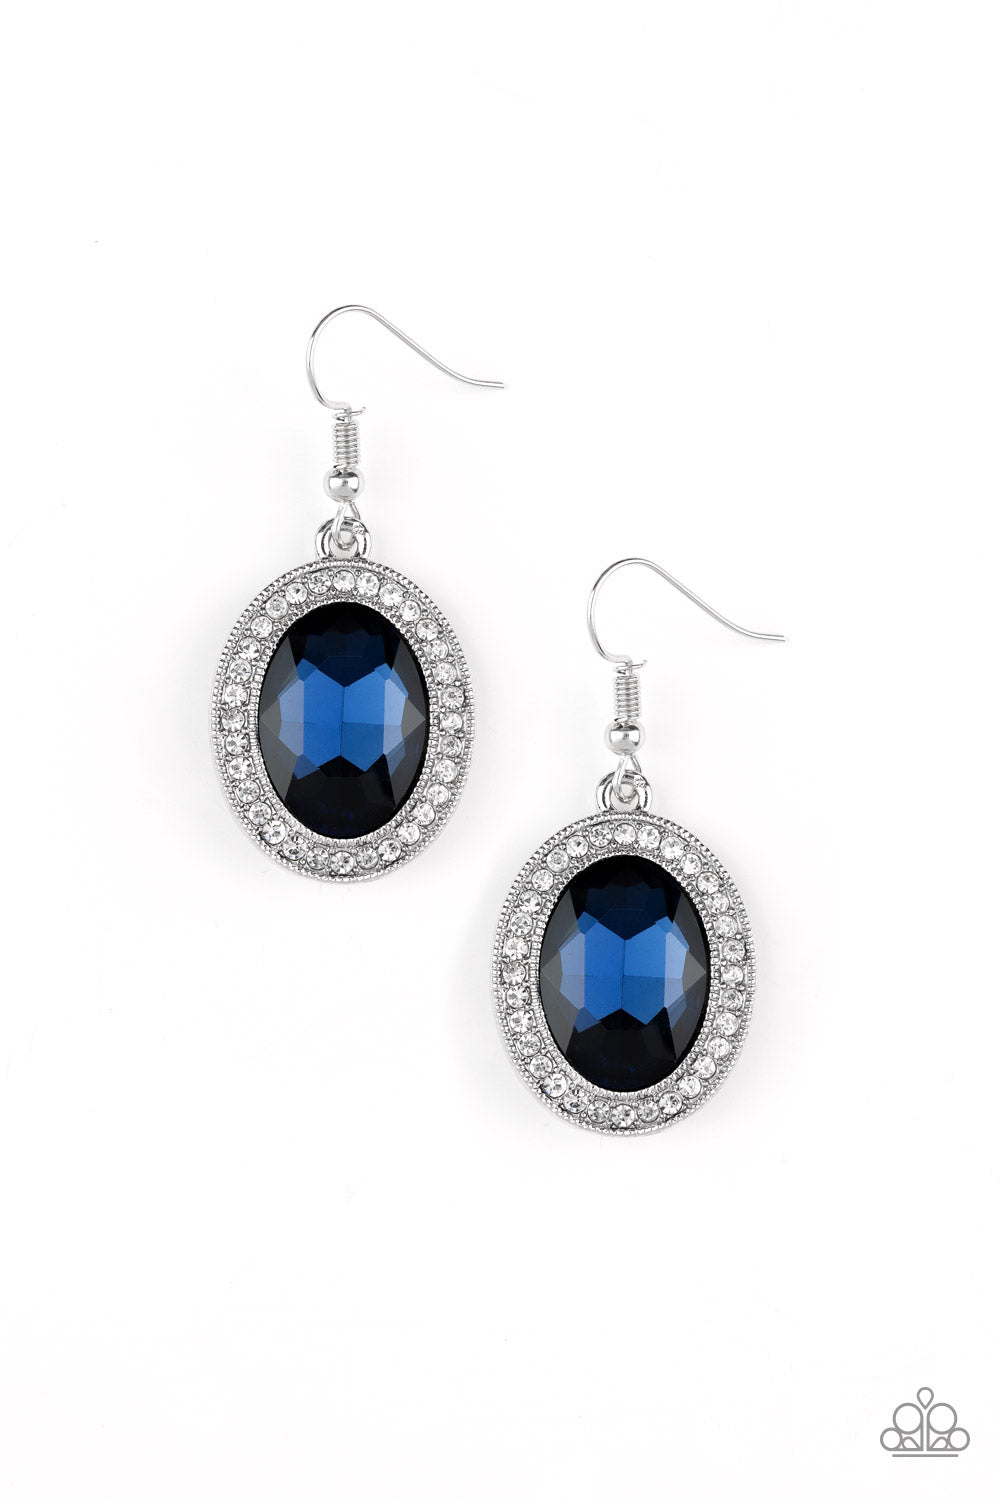 Paparazzi Accessories Only Fame In Town Blue Silver Earrings Rochelle S Boutique Llc